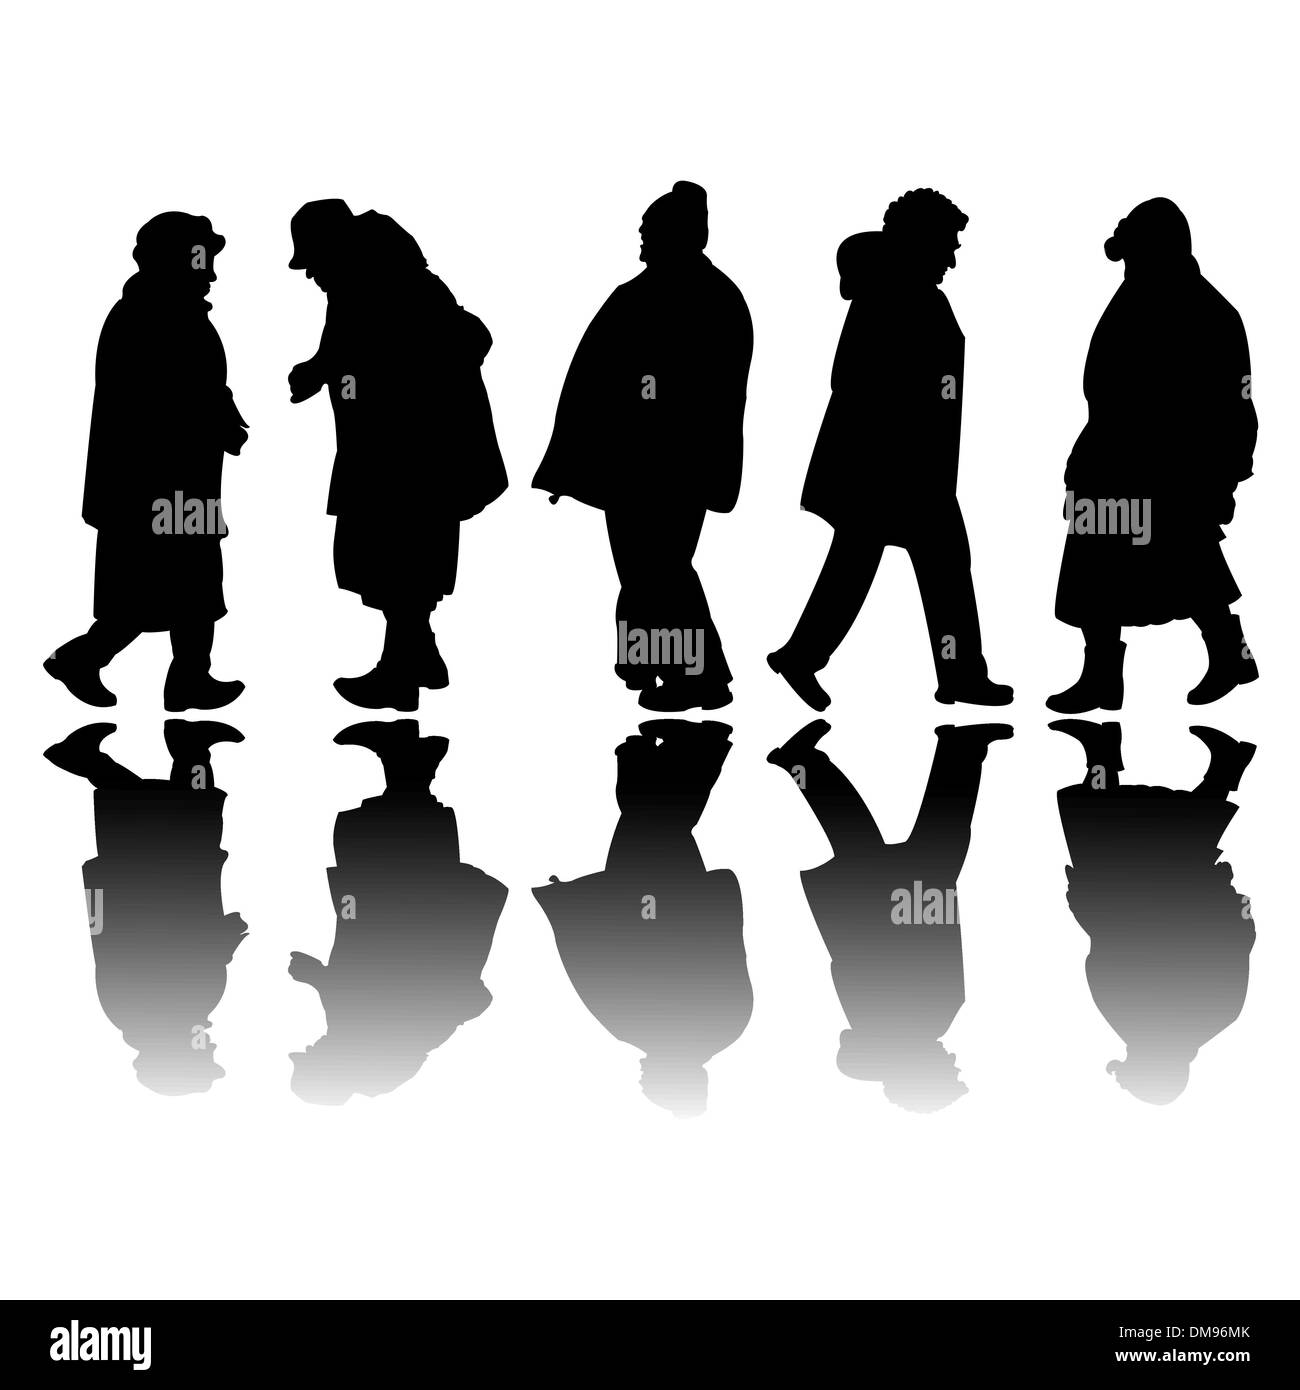 old people black silhouettes Stock Vector